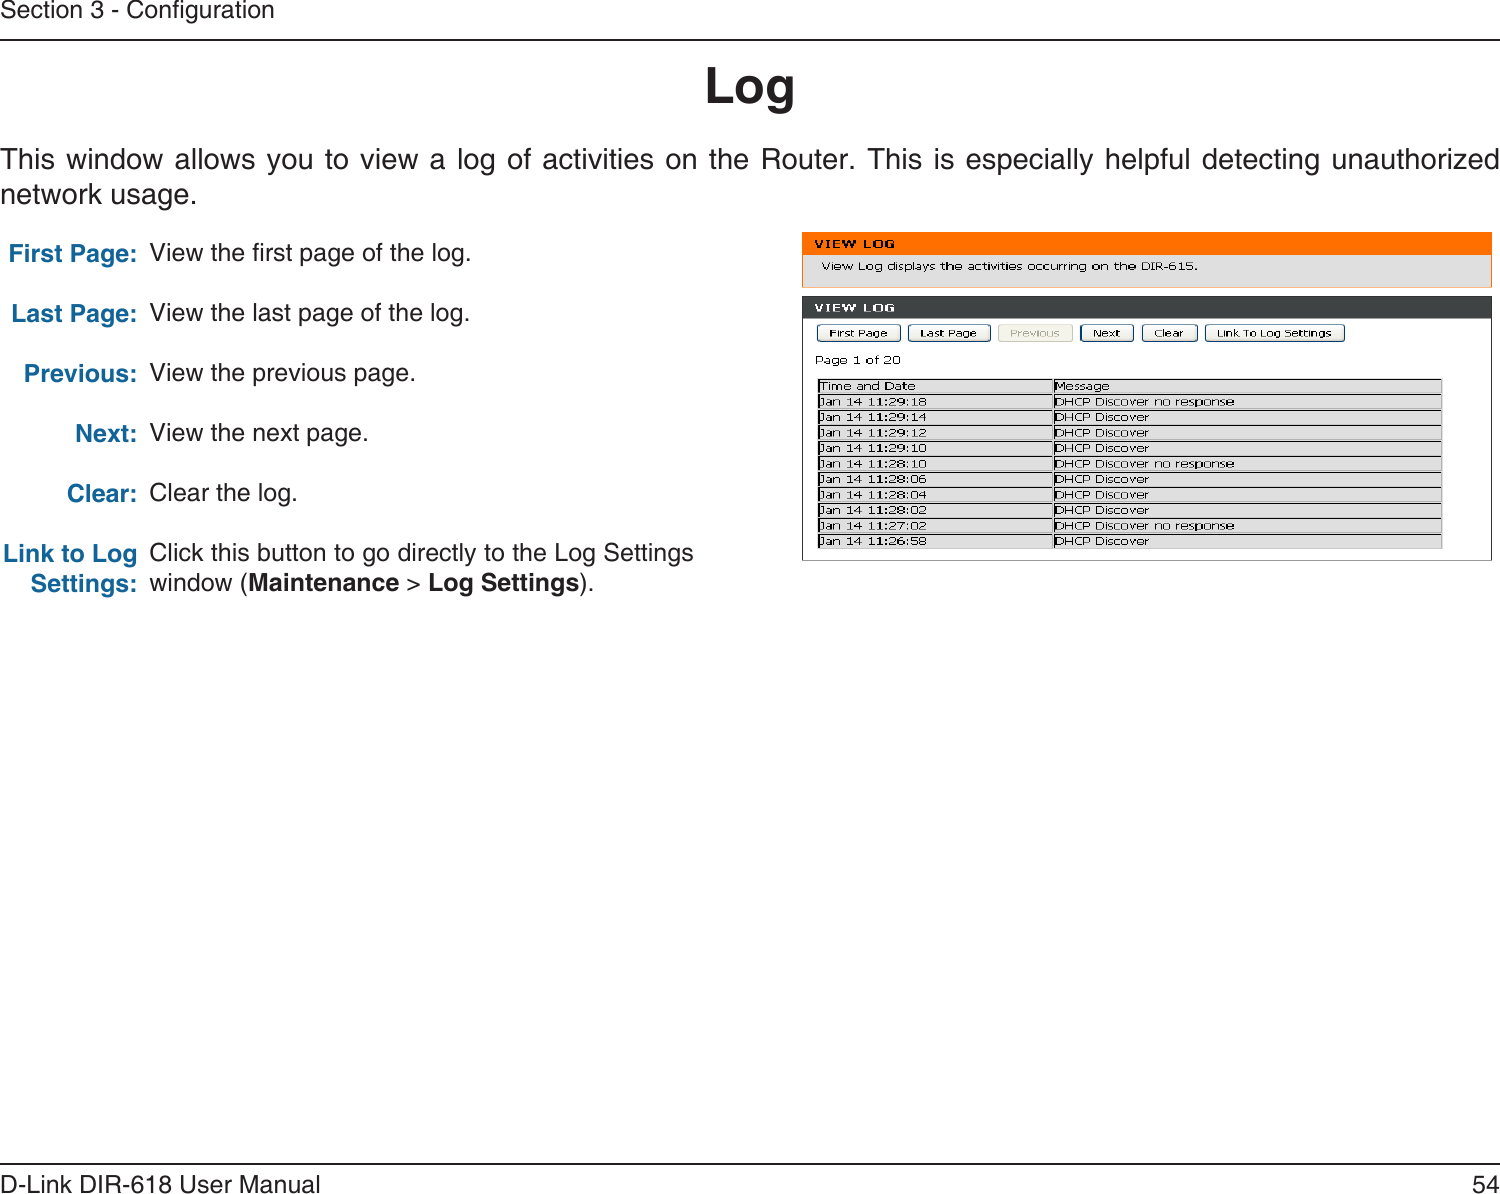 54D-Link DIR-618 User ManualSection 3 - CongurationLogFirst Page:Last Page:Previous:Next:Clear:Link to Log Settings:View the rst page of the log.View the last page of the log.View the previous page.View the next page.Clear the log.Click this button to go directly to the Log Settings window (Maintenance &gt; Log Settings).This window allows you to view a log of activities on the Router. This is especially helpful detecting unauthorizednetwork usage.